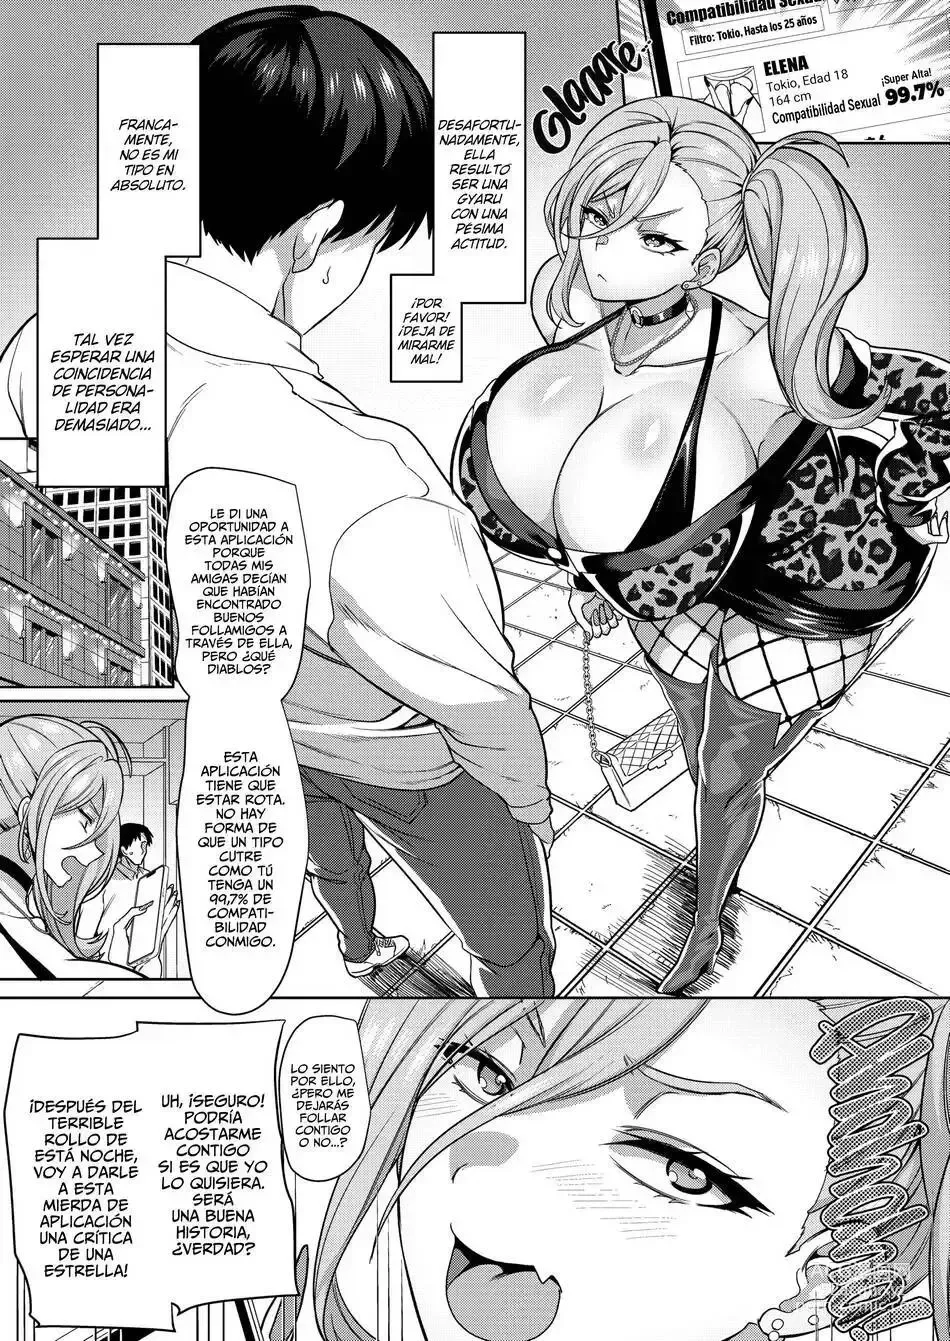 Page 4 of doujinshi Sexual Application to Attract Whores 1-2